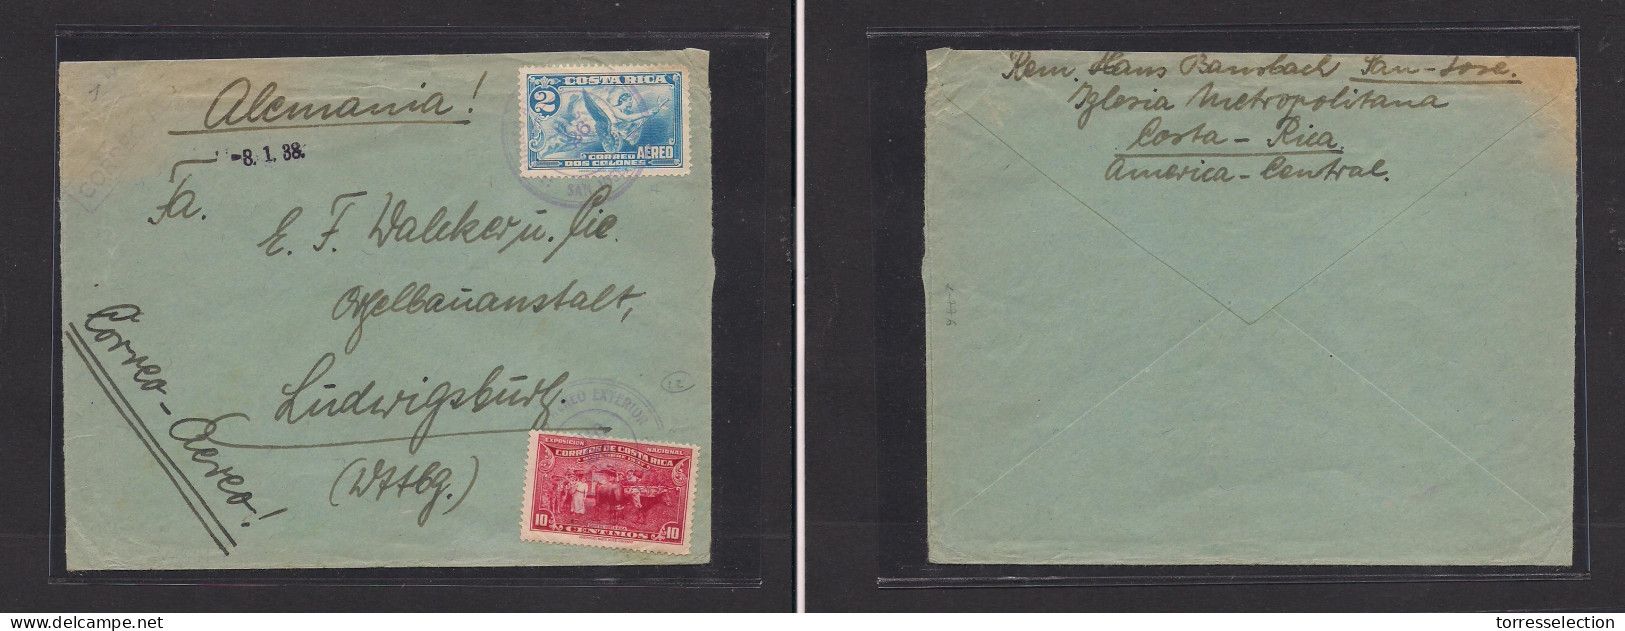 COSTA RICA. Costa Rica - Cover - 1938 San Jose To Germany Ludwirgsburg Mult Fkd Air Env Dos Soles Stamp. Easy Deal. XSAL - Costa Rica